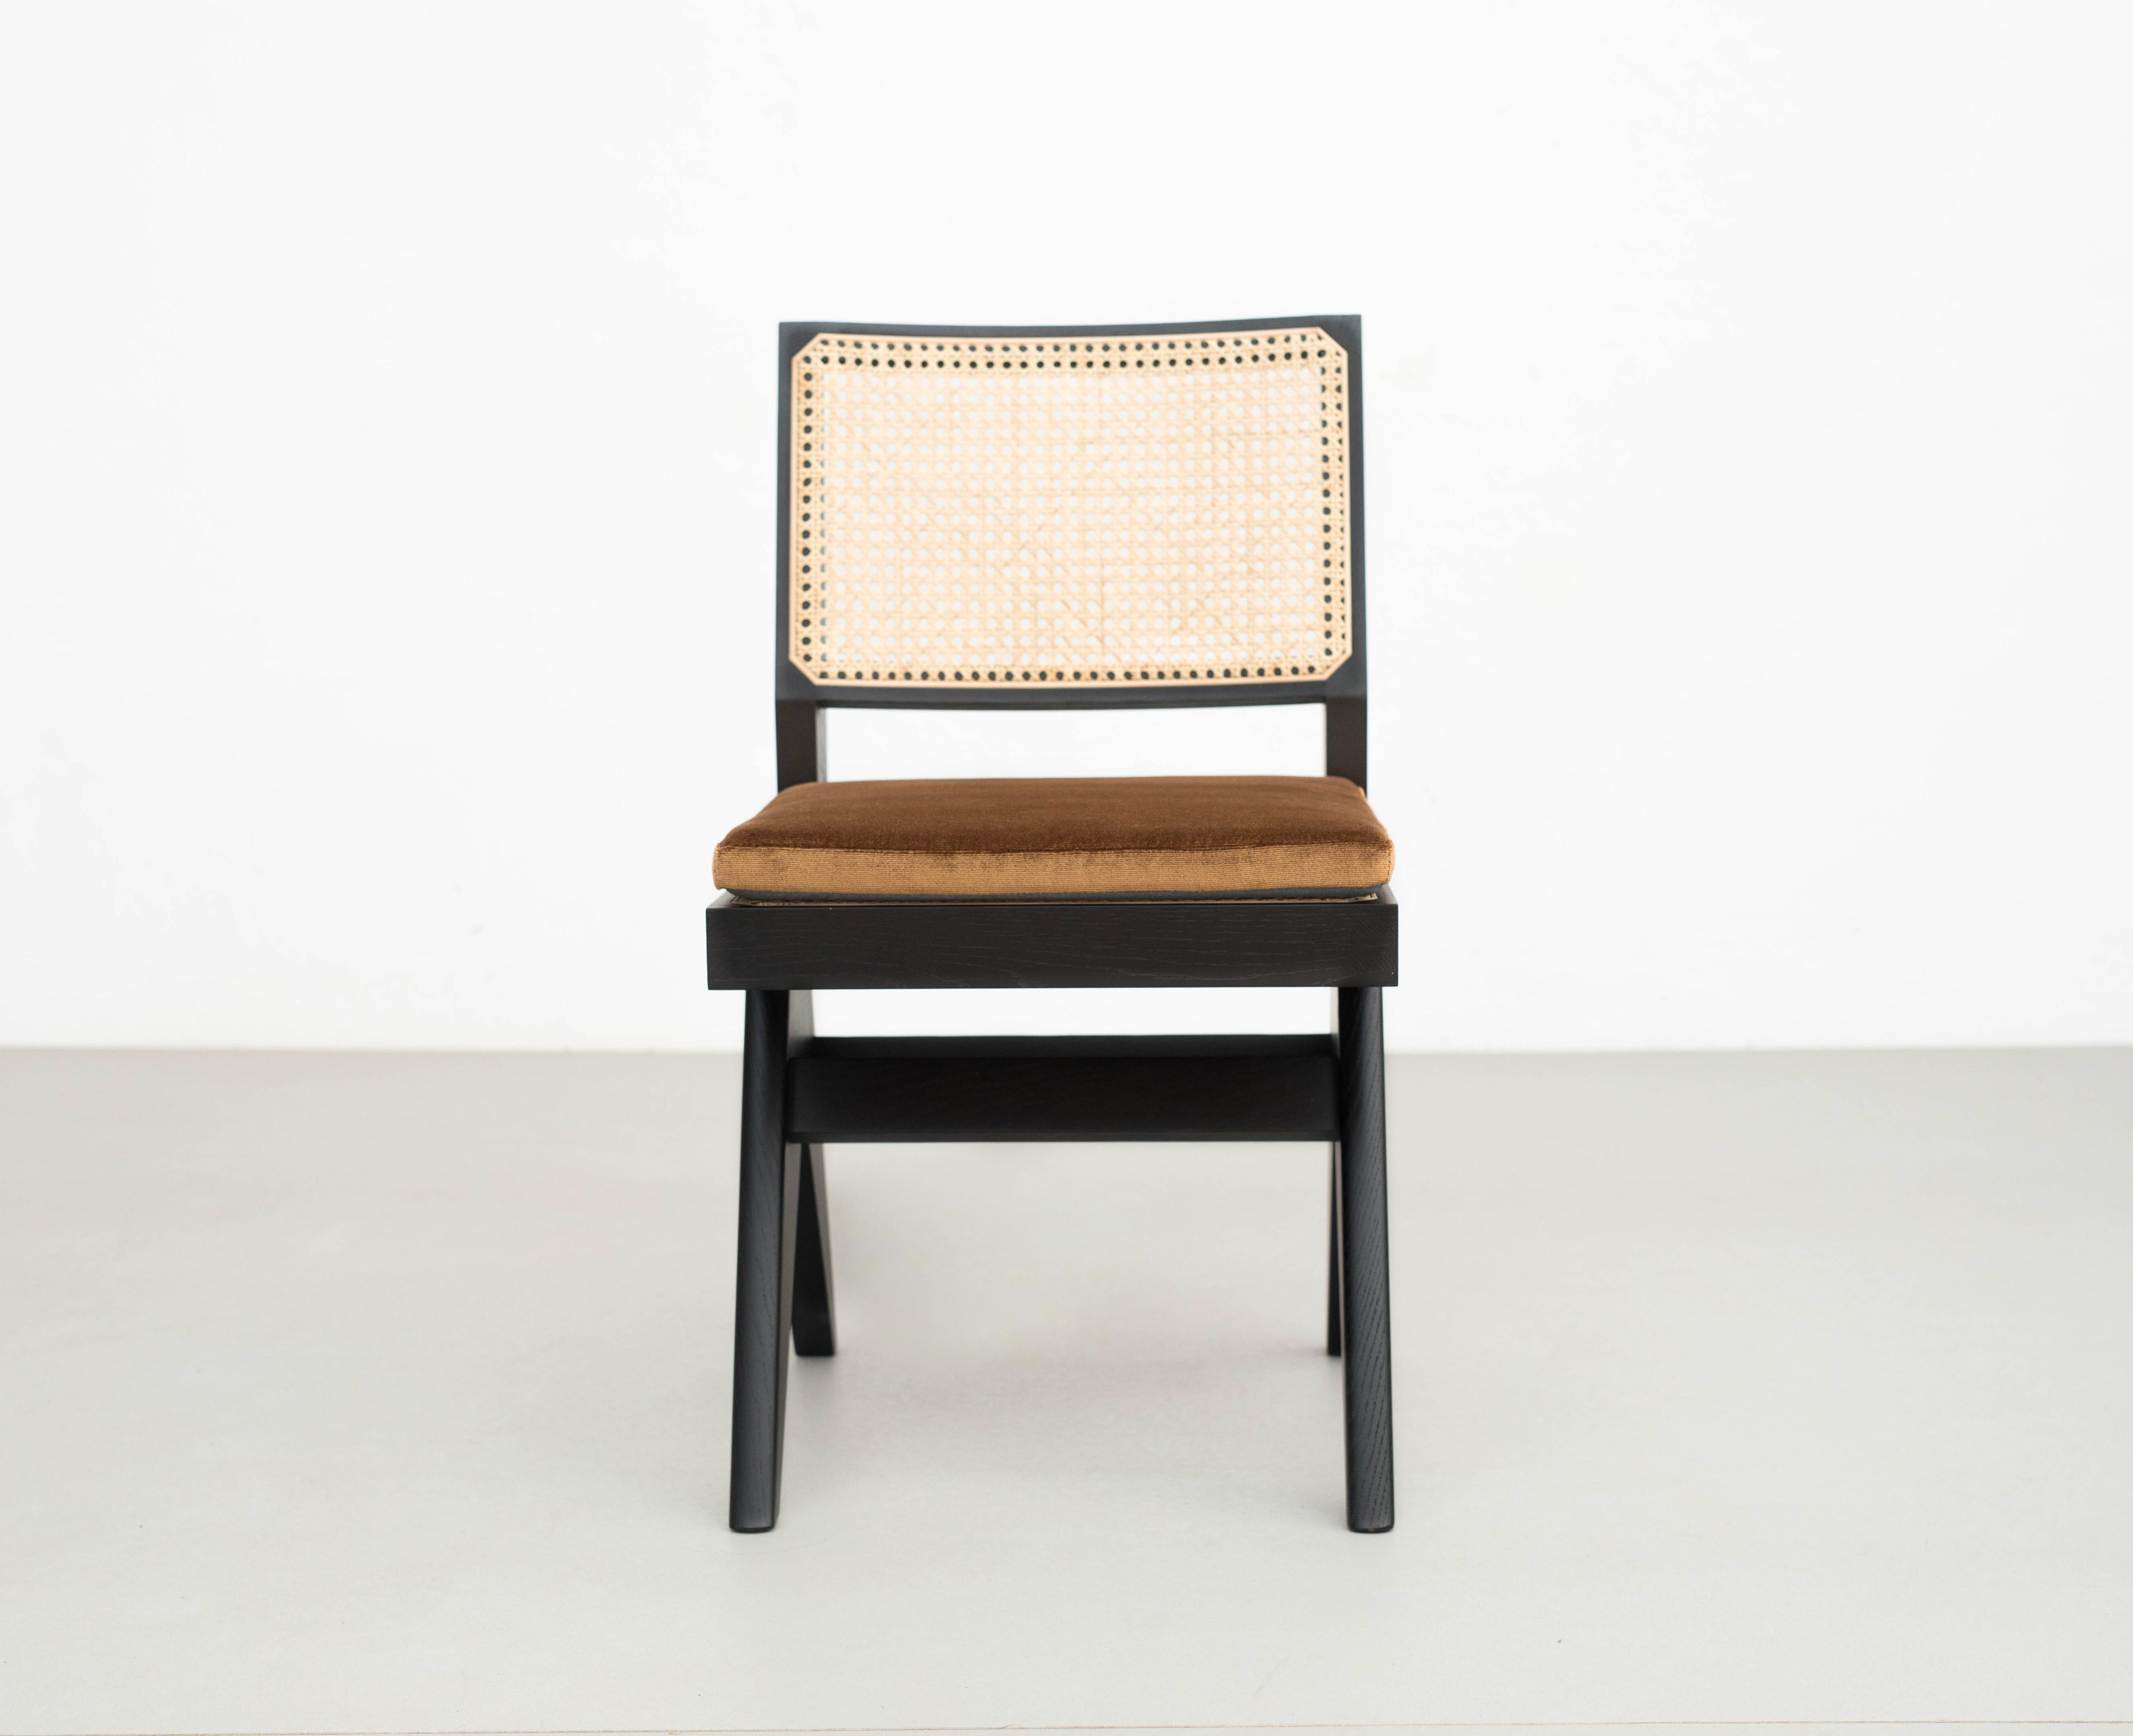 Chair designed by Pierre Jeanneret circa 1950, relaunched in 2019.
Manufactured by Cassina in Italy.

This chair is one of the most recognisable in Chandigarh’s Capitol Complex, found throughout the offices of the Secretariat. The independent